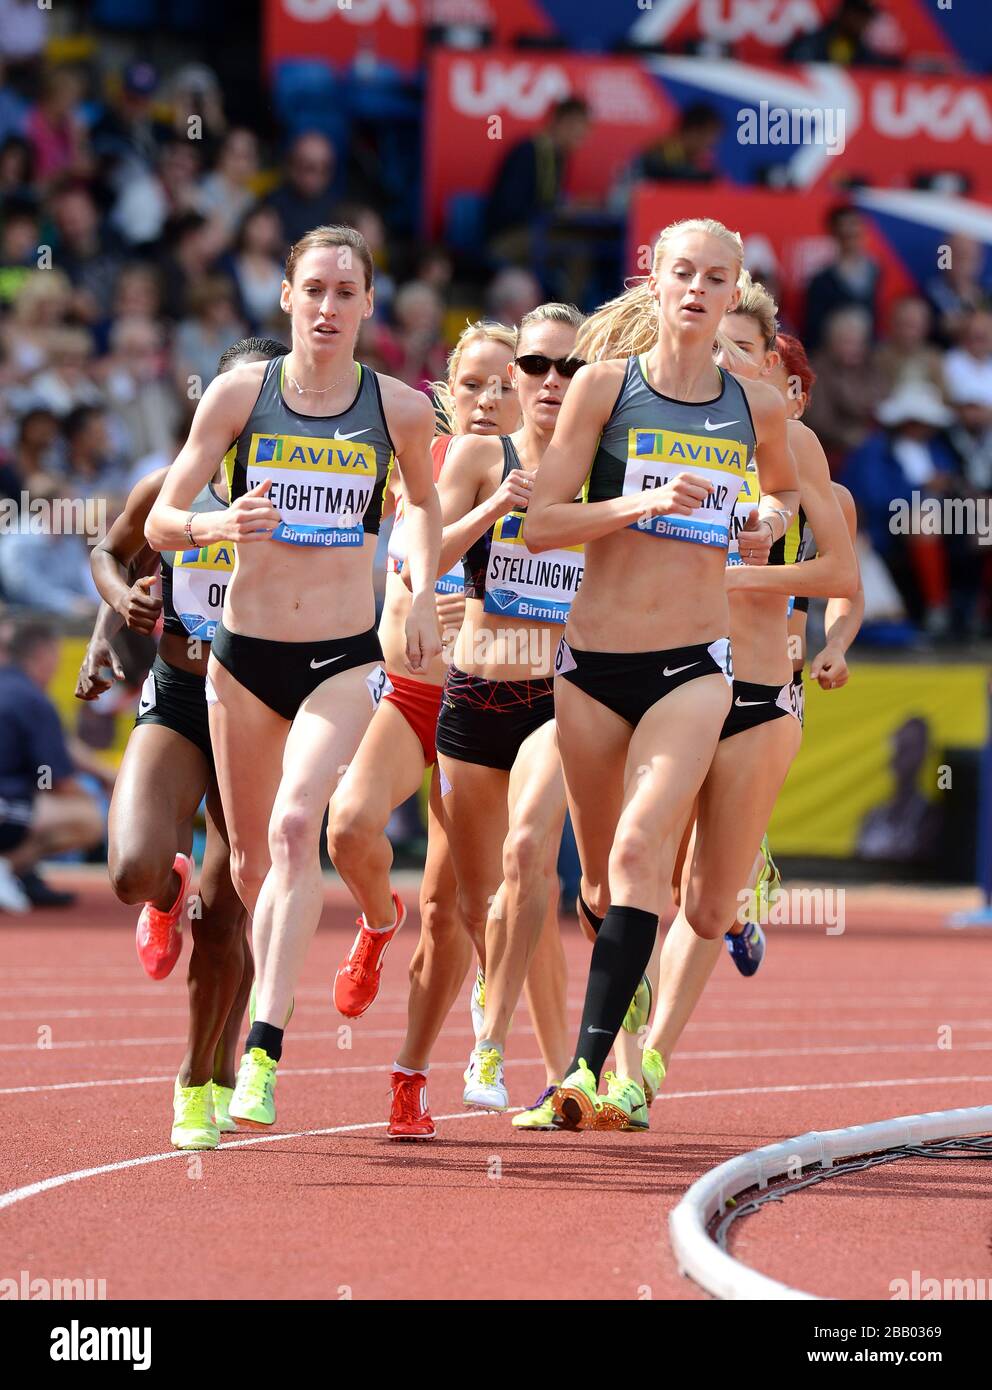 https://c8.alamy.com/comp/2BB0369/great-britains-hannah-england-right-and-laura-weightman-left-in-action-during-the-womens-1500m-2BB0369.jpg